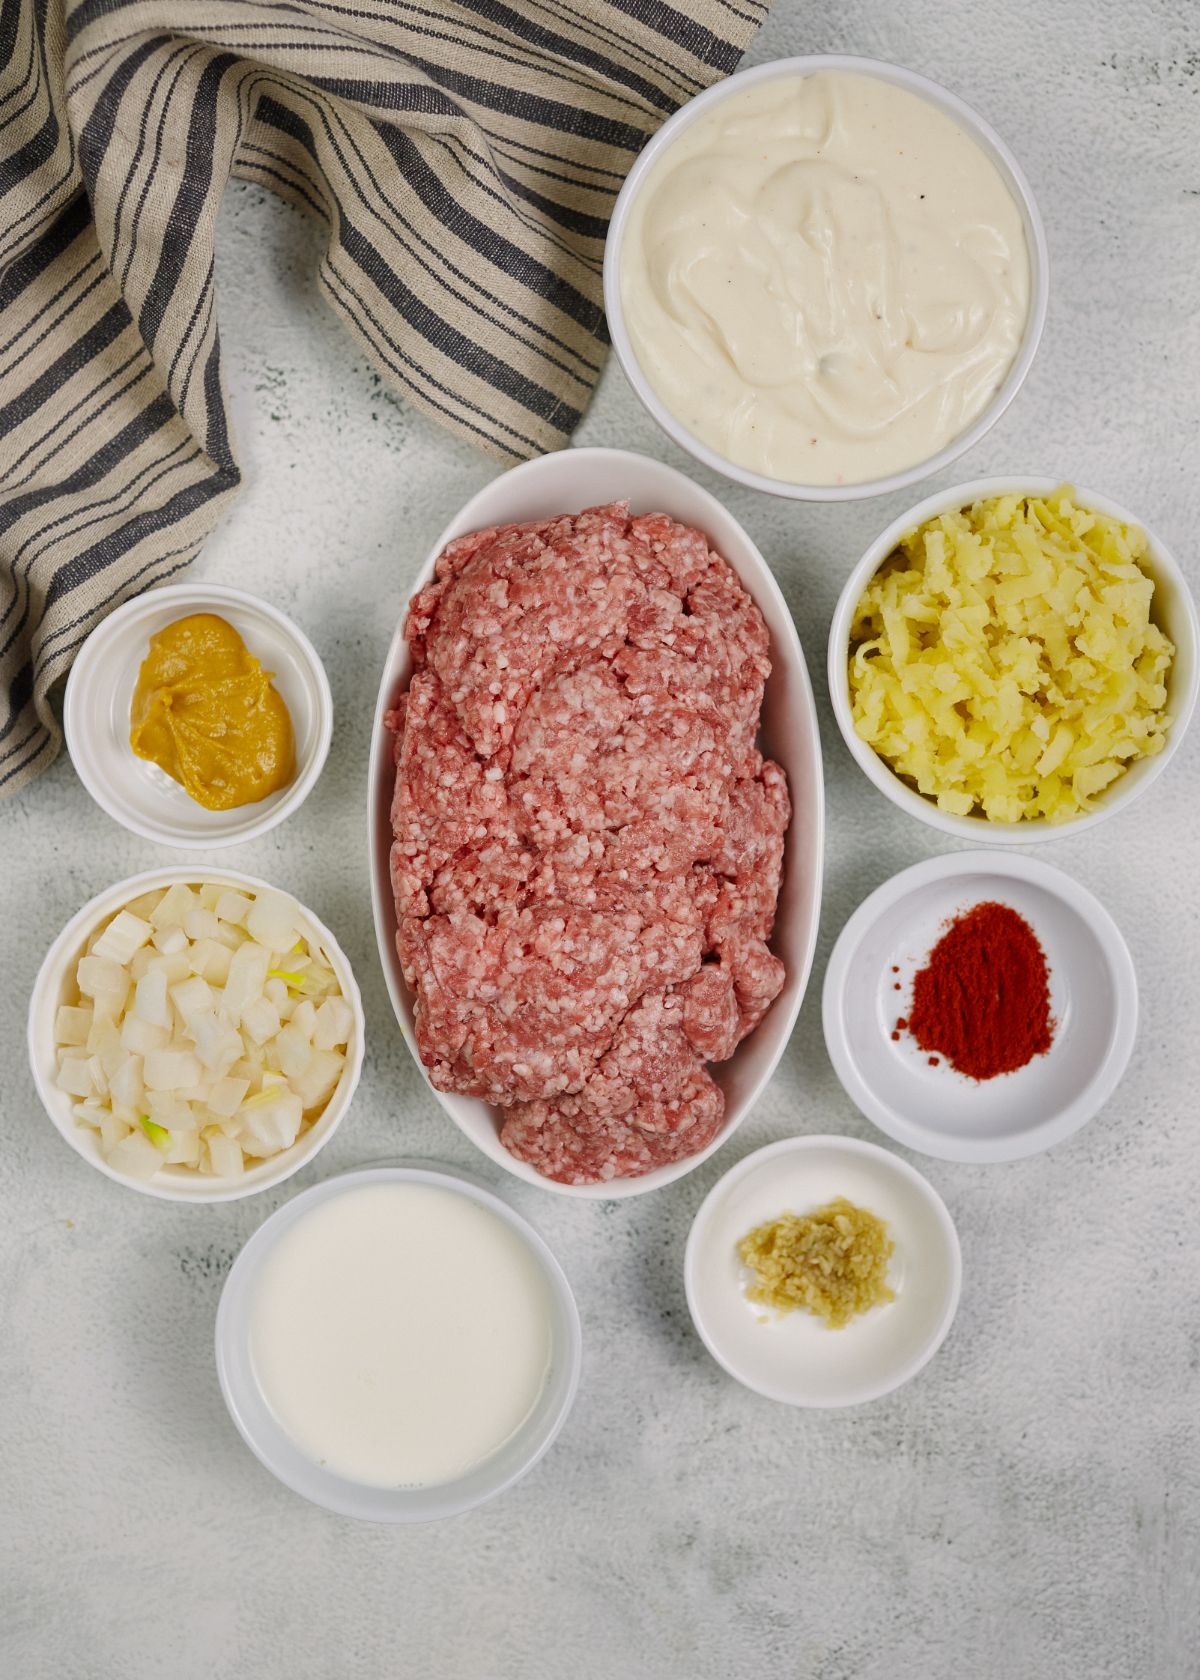 white ramekins and bowls of ingredients including raw ground beef on white table by striped napkin